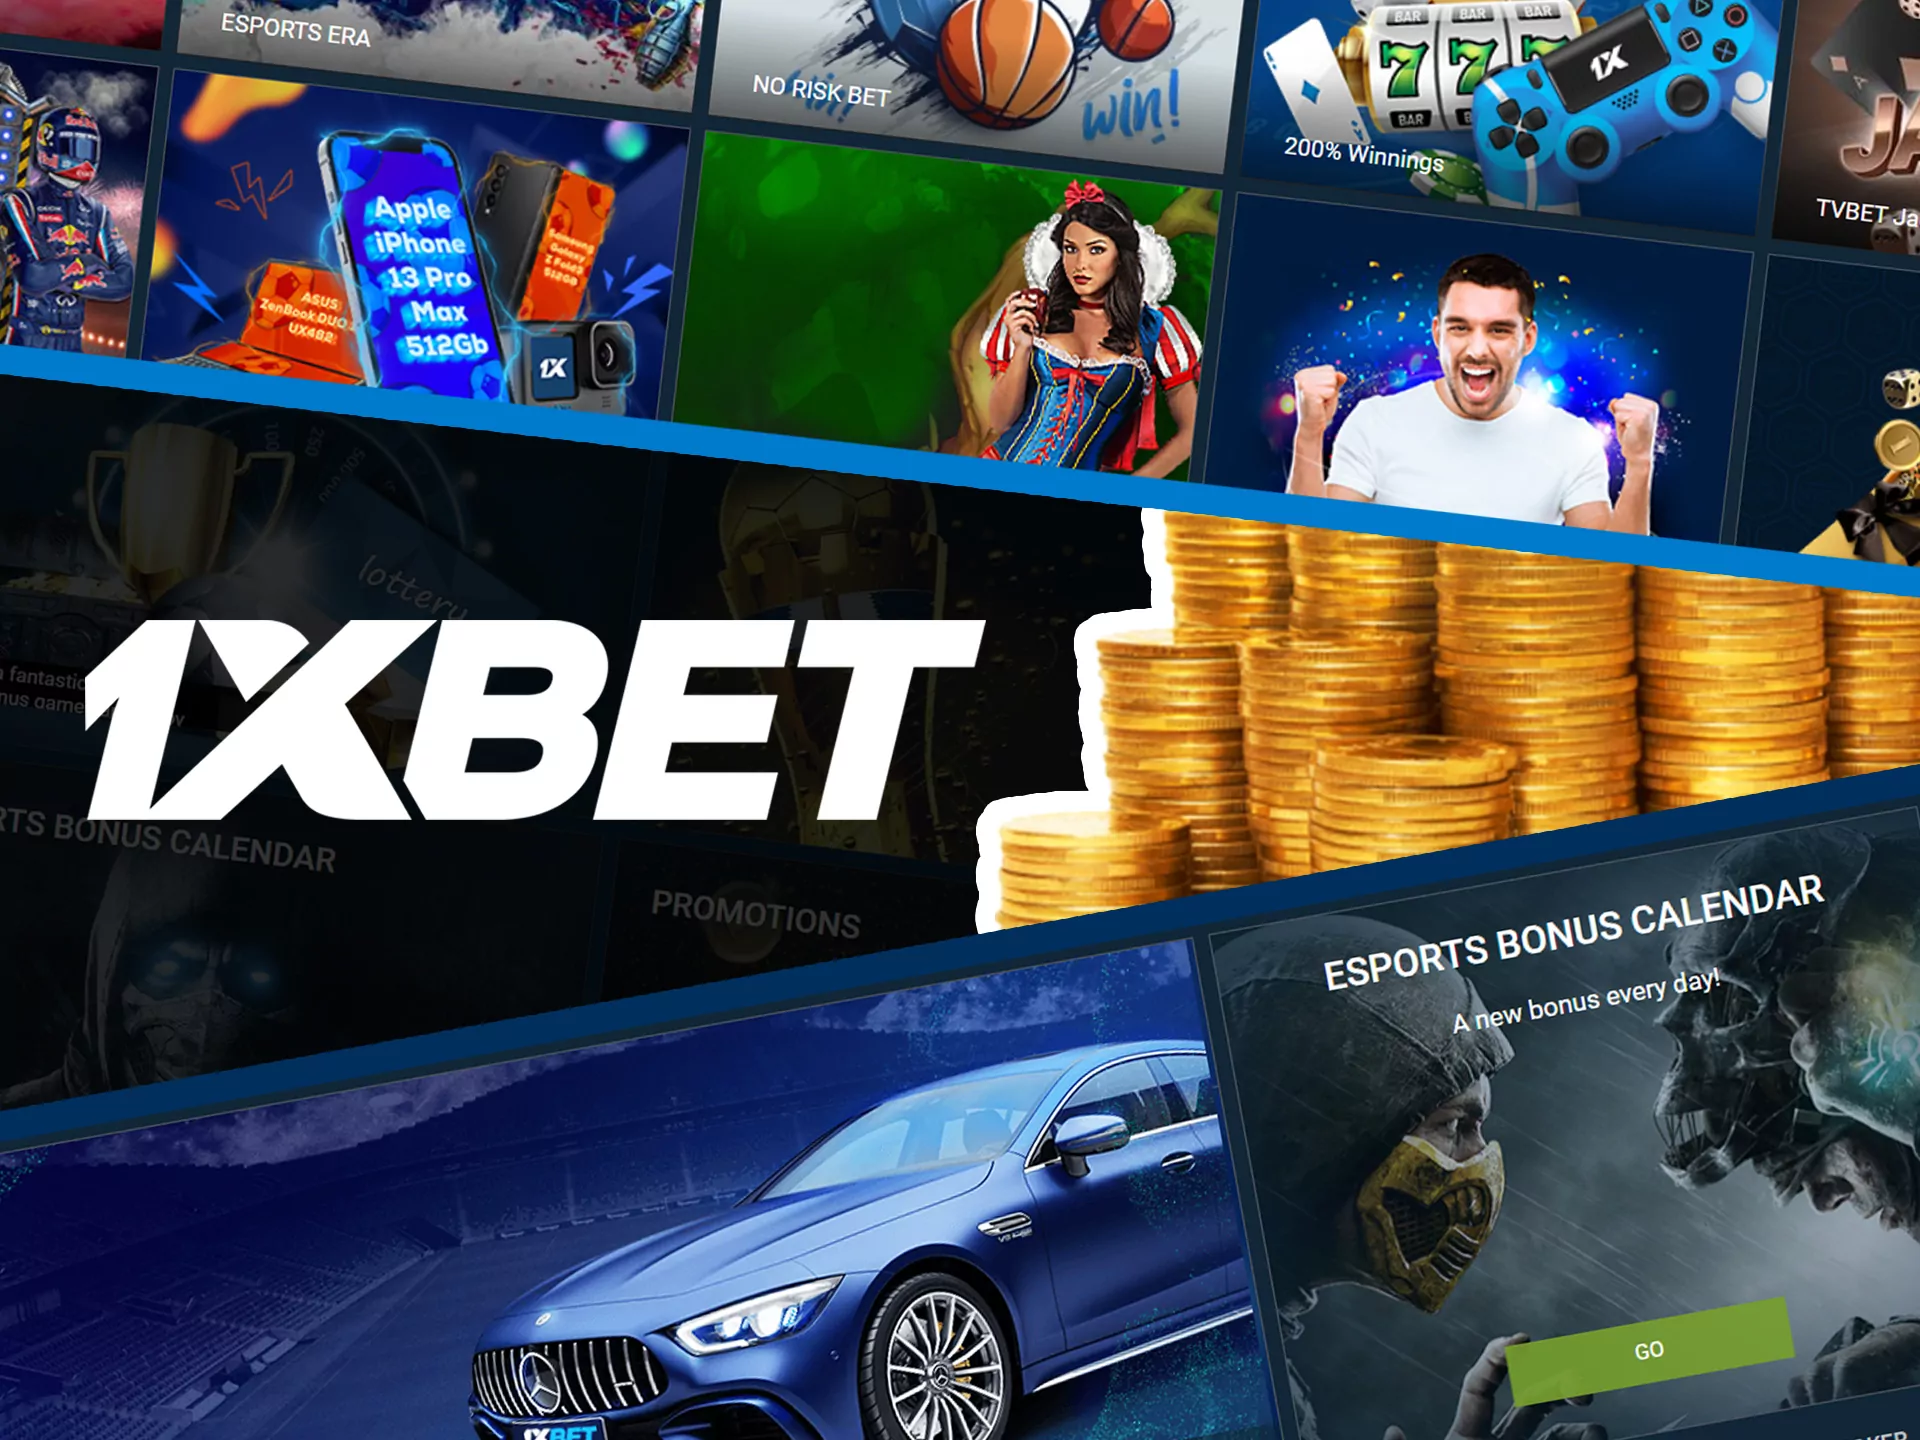 1xbet Bonuses and Promotions.